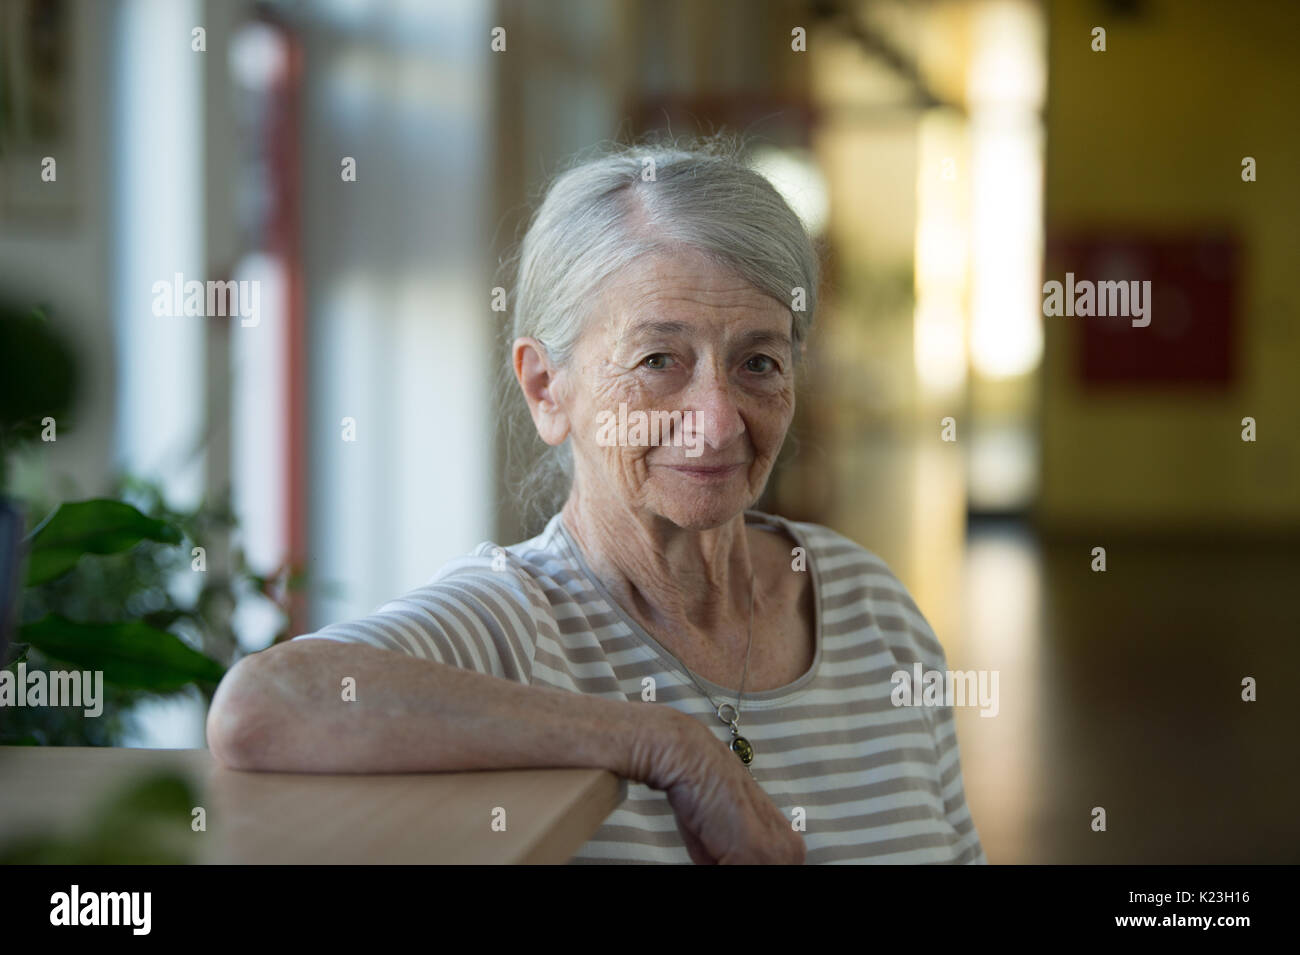 Kretz High Resolution Stock Photography and Images - Alamy